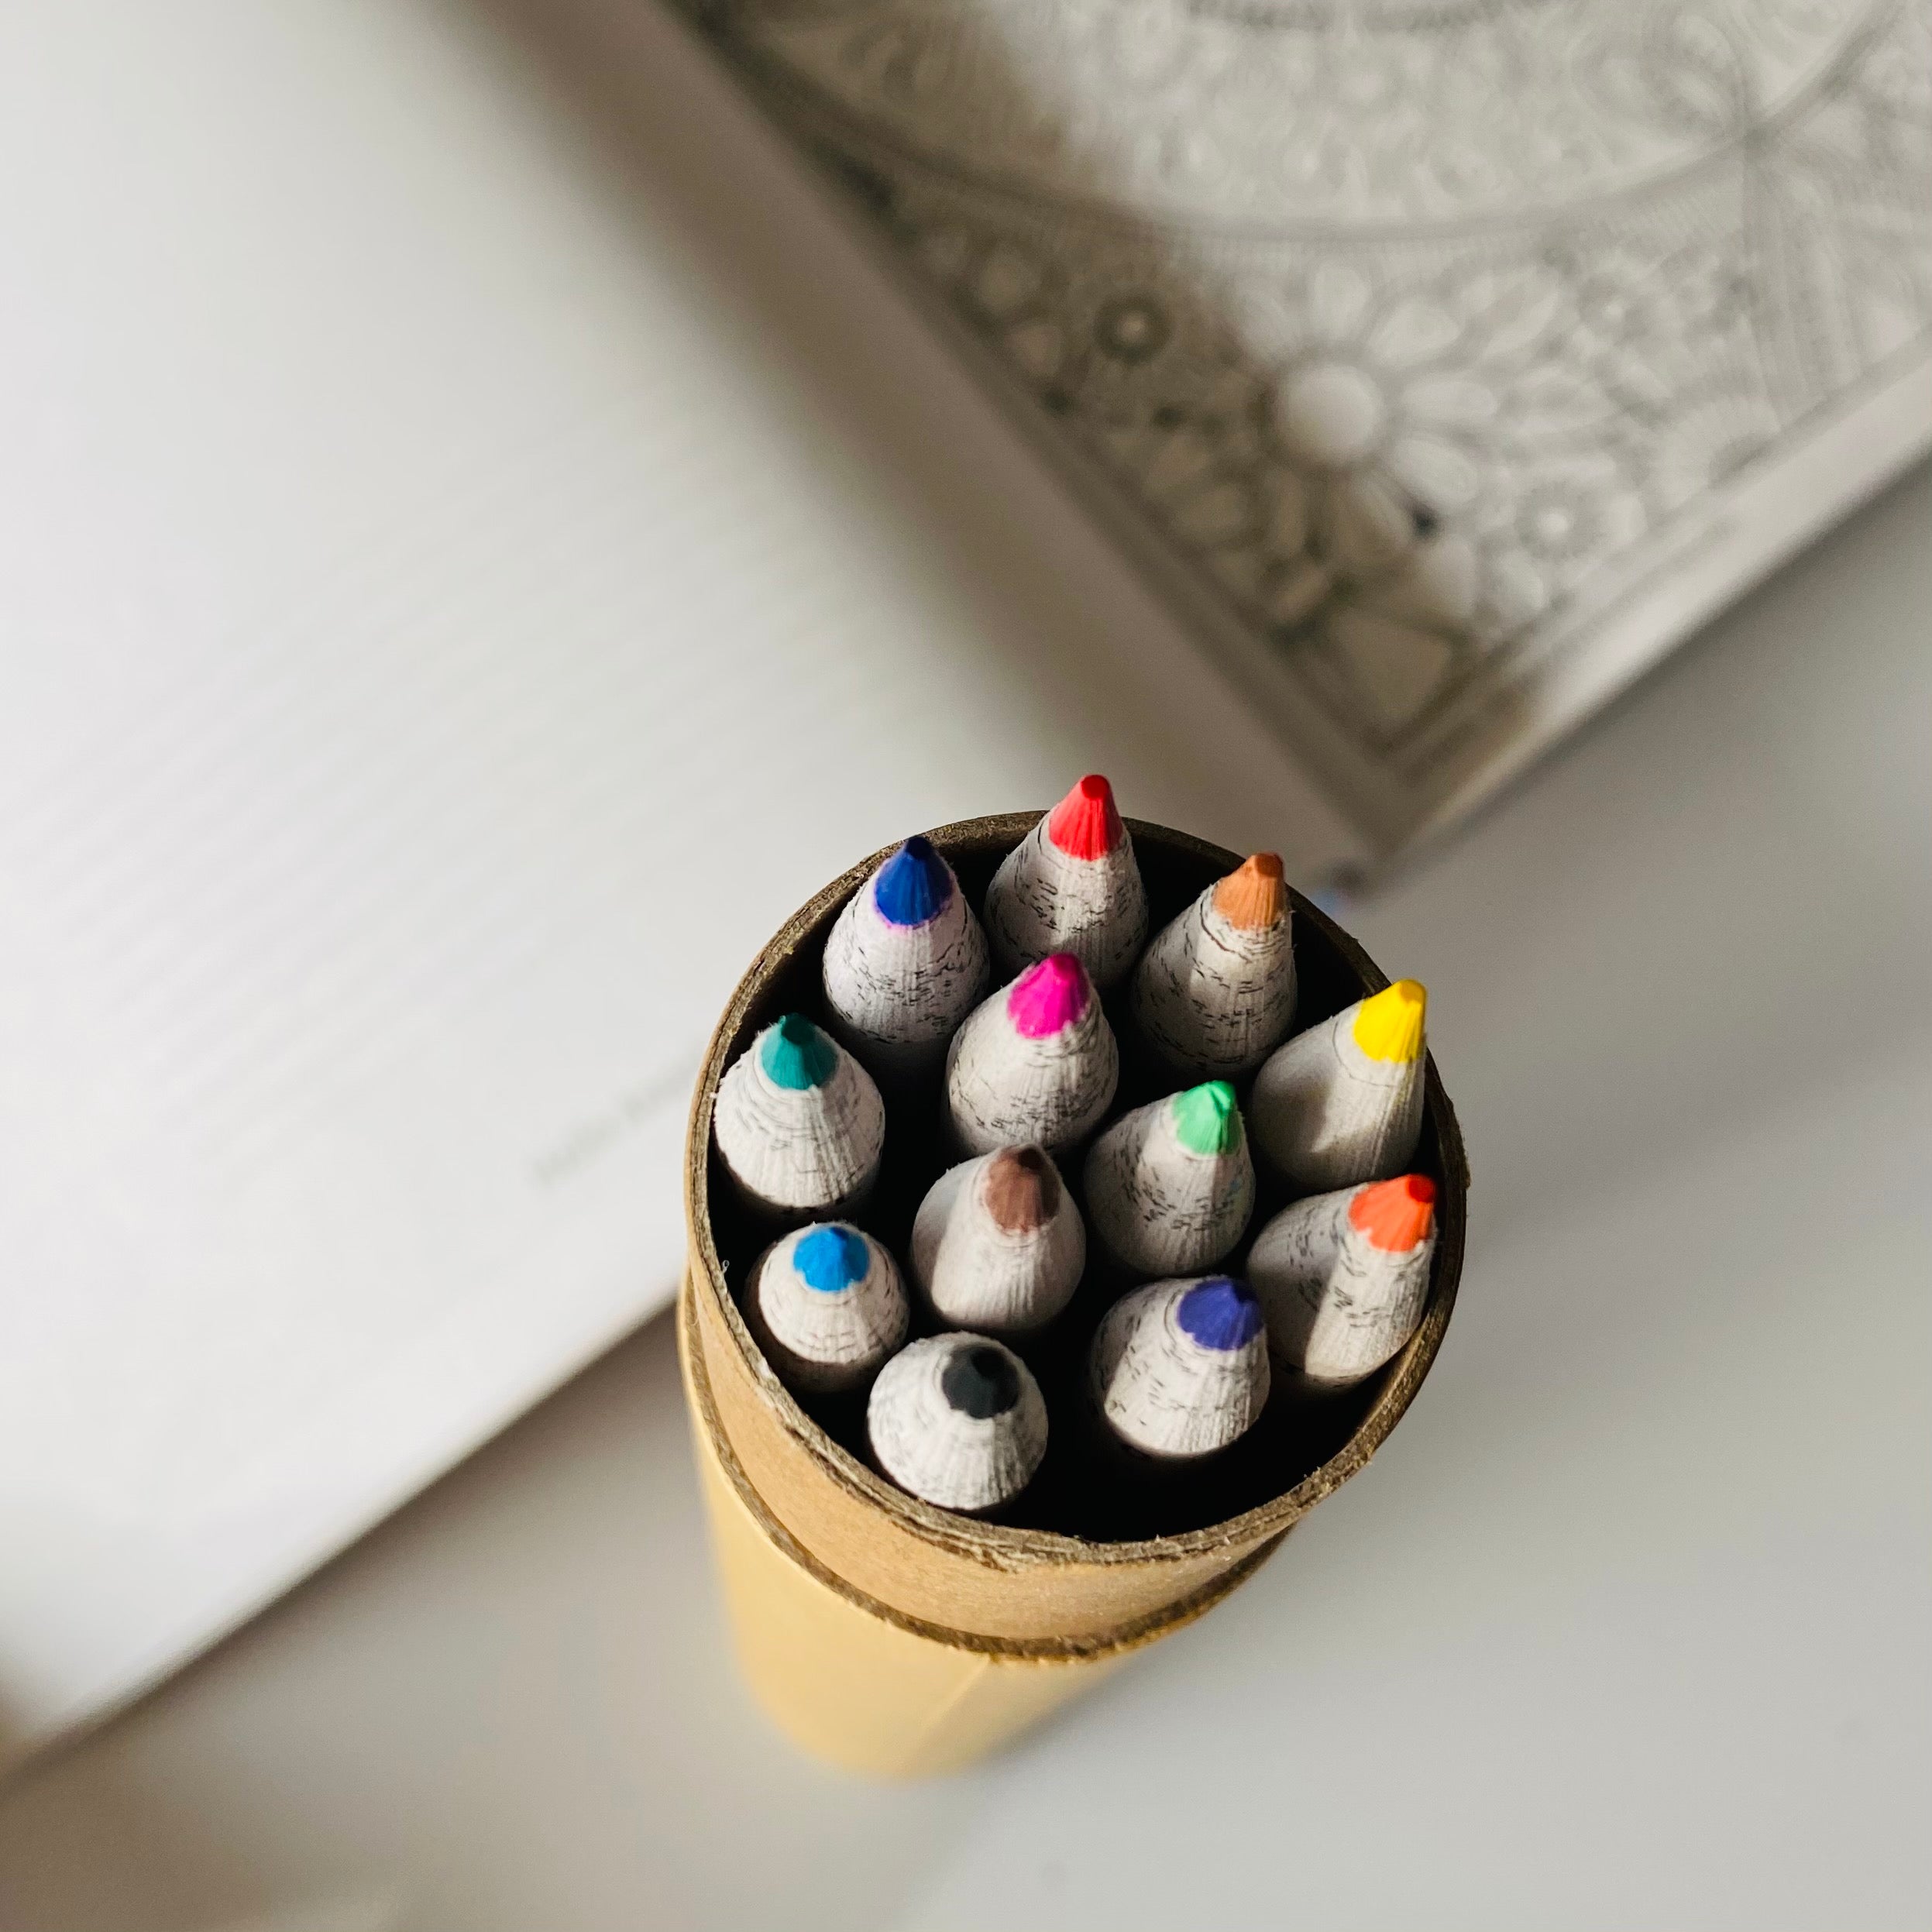 Colored Pencils, Pens, & Markers for Adult Coloring Books - Awake & Mindful